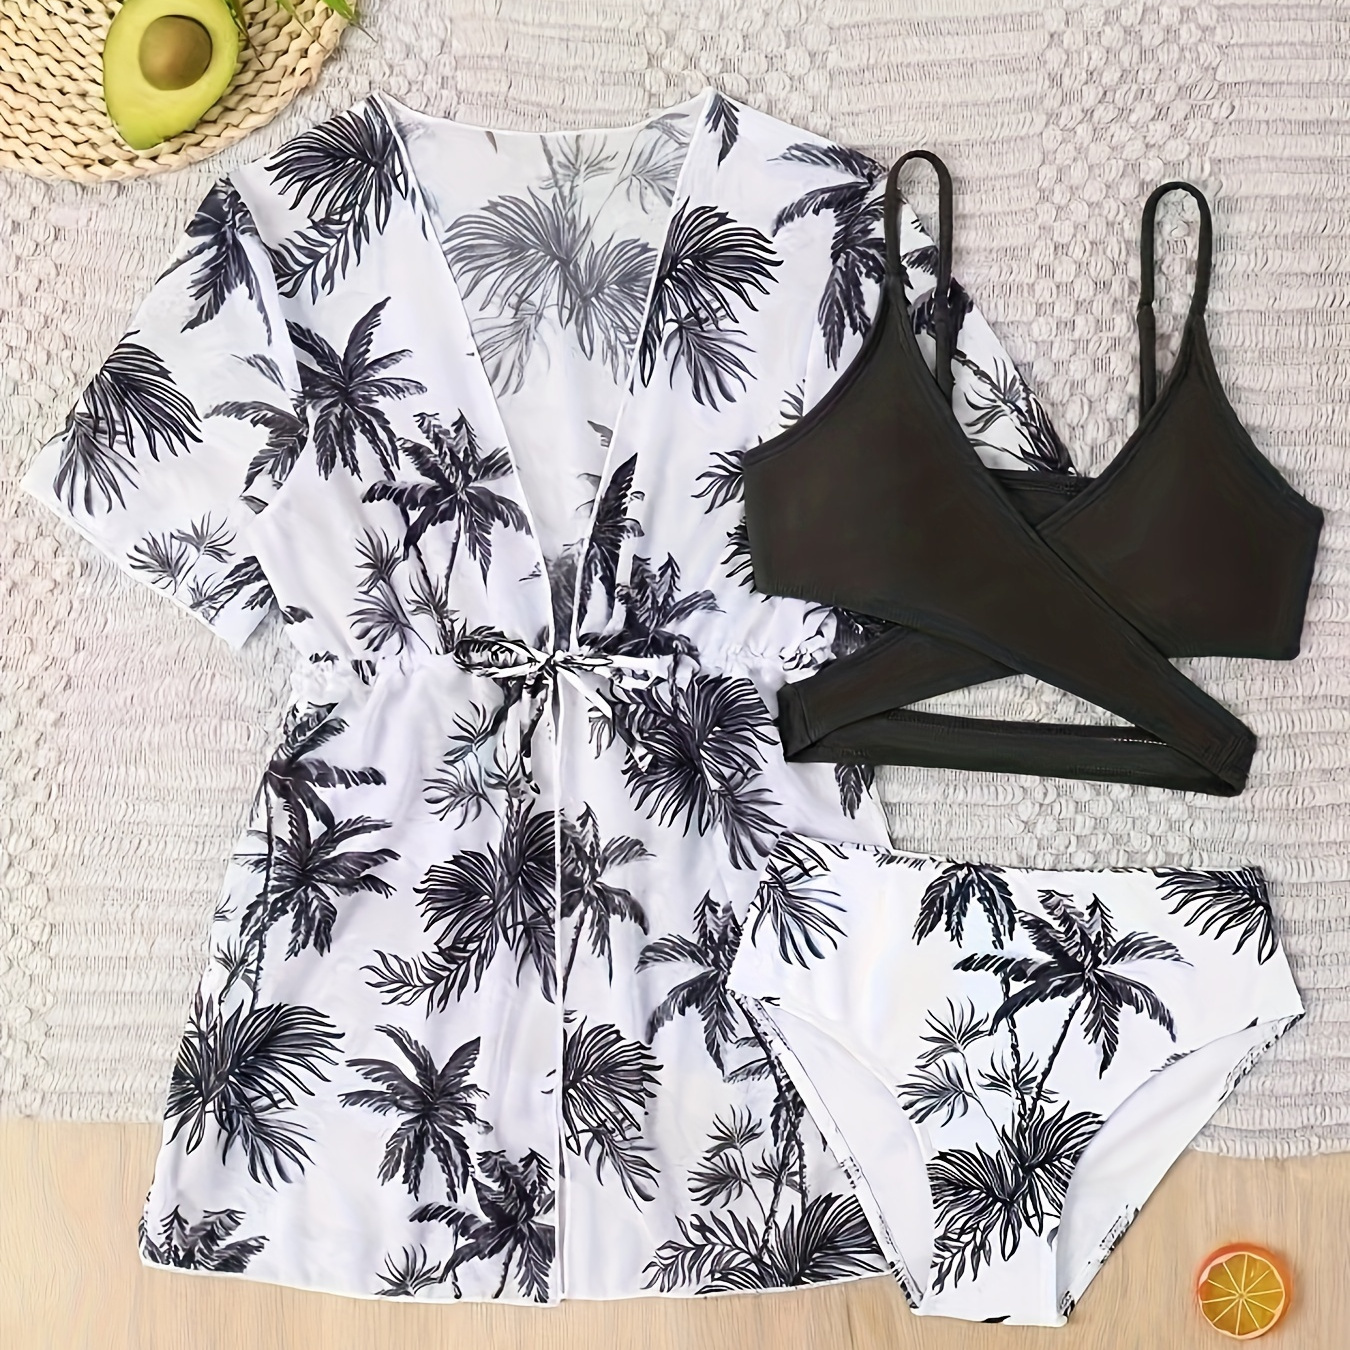 

Coconut Trees Prit 3 Piece Set Bikini, V Neck High Cut With Cover Up Shirt Swimsuits, Women's Swimwear & Clothing